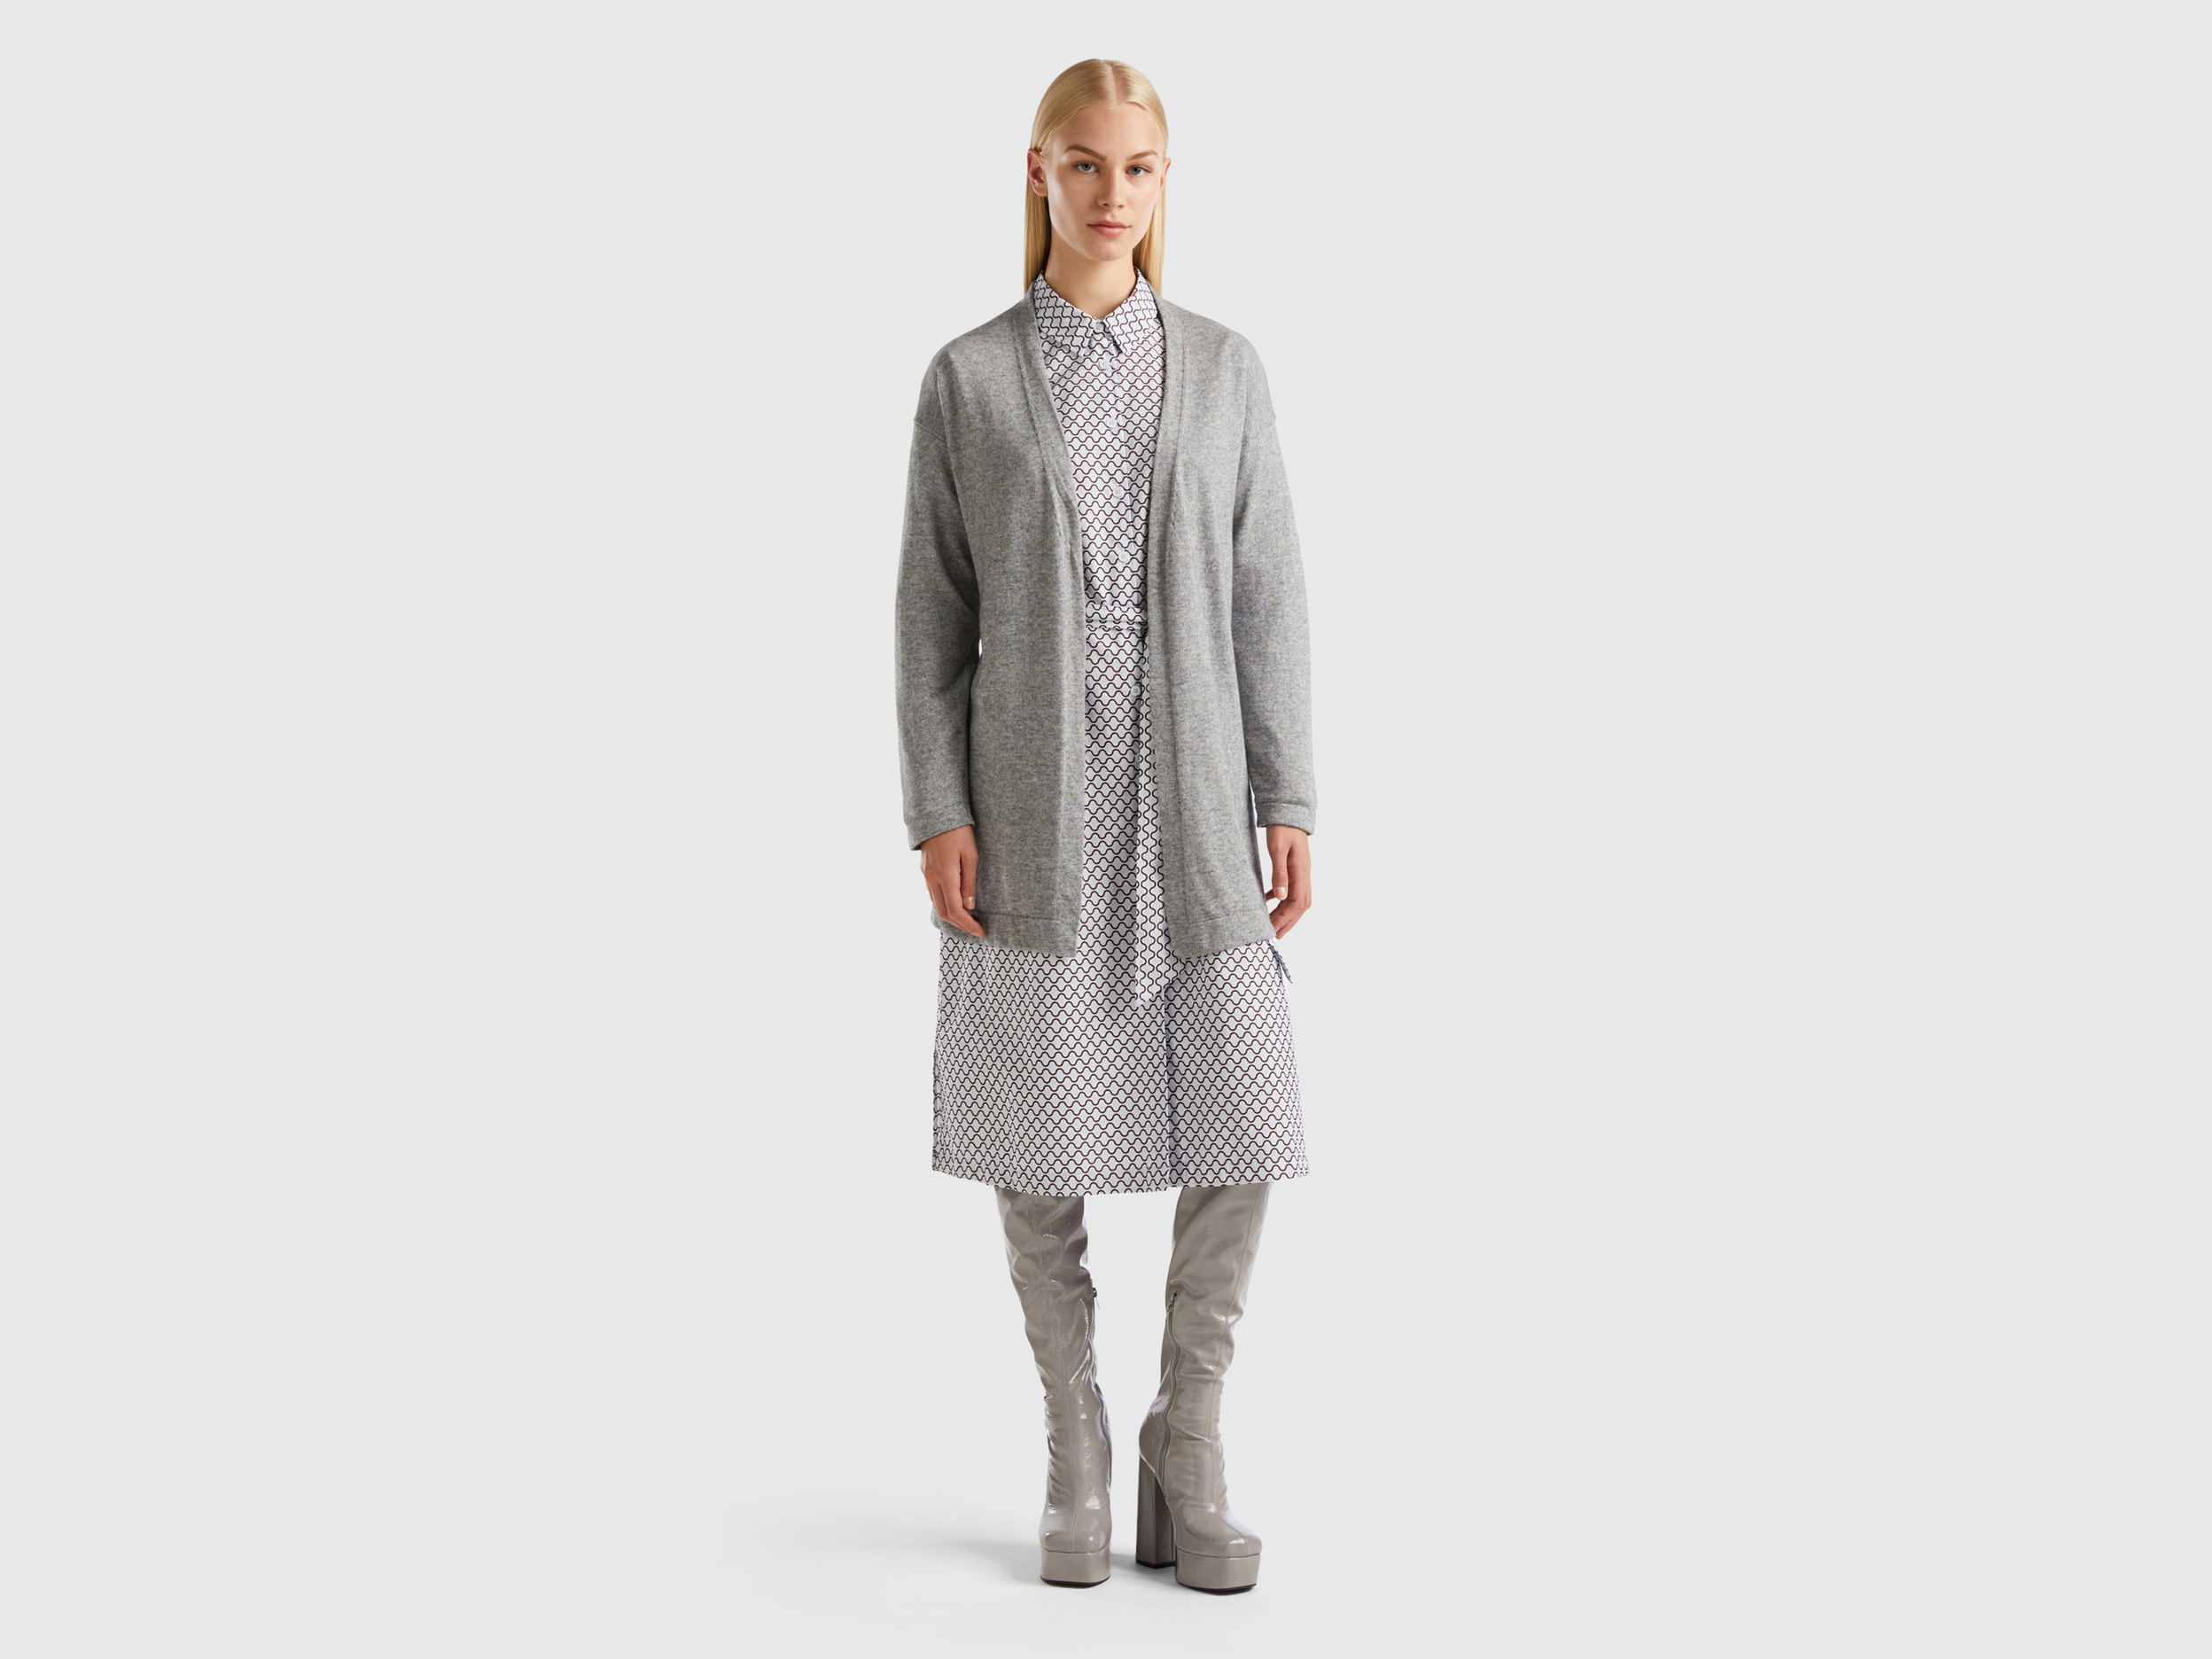 Benetton, Light Gray Open Cardigan In Cashmere And Wool Blend, size XS, Light Gray, Women